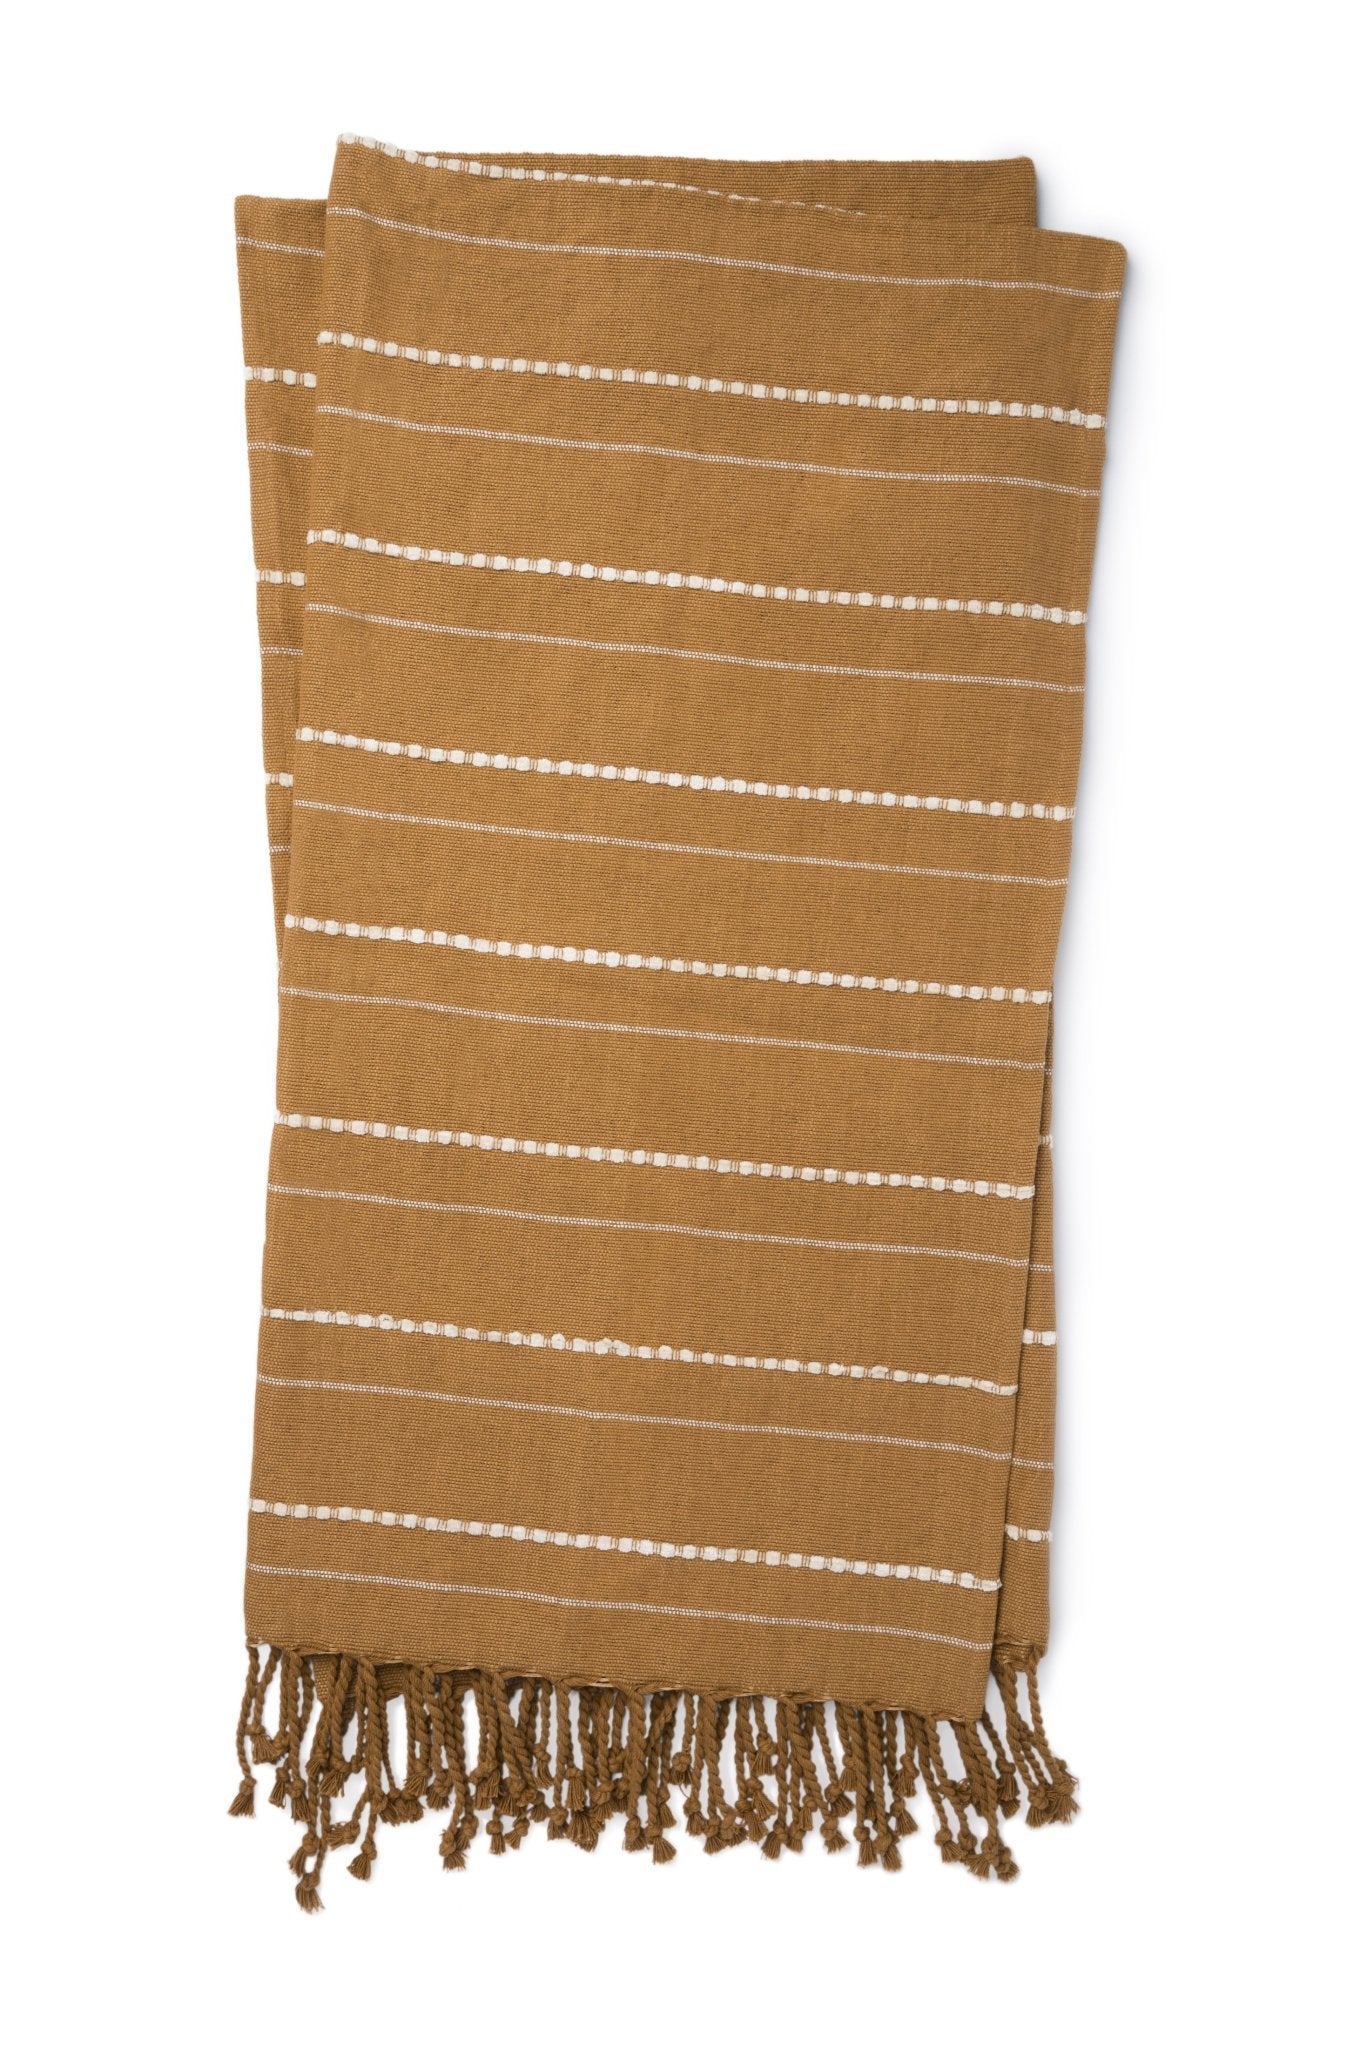 Magnolia Home Amie T1038 Gold/Natural Throw Blanket - Rug & Home